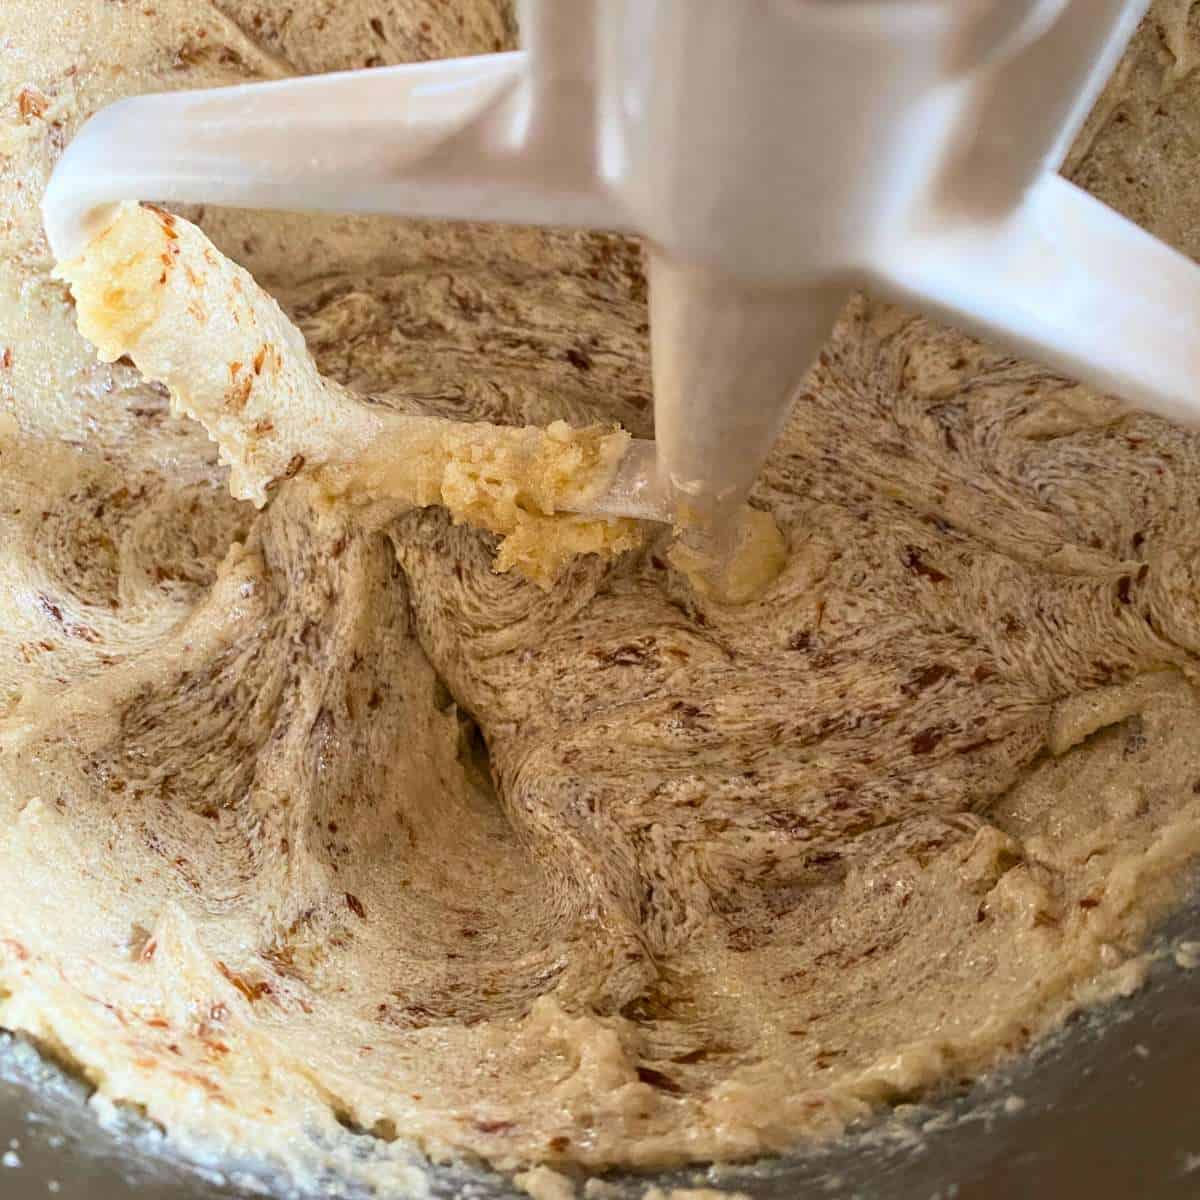 Sugar, margarine, flax "egg" and vanilla extract being mixed together in a stand mixer bowl.